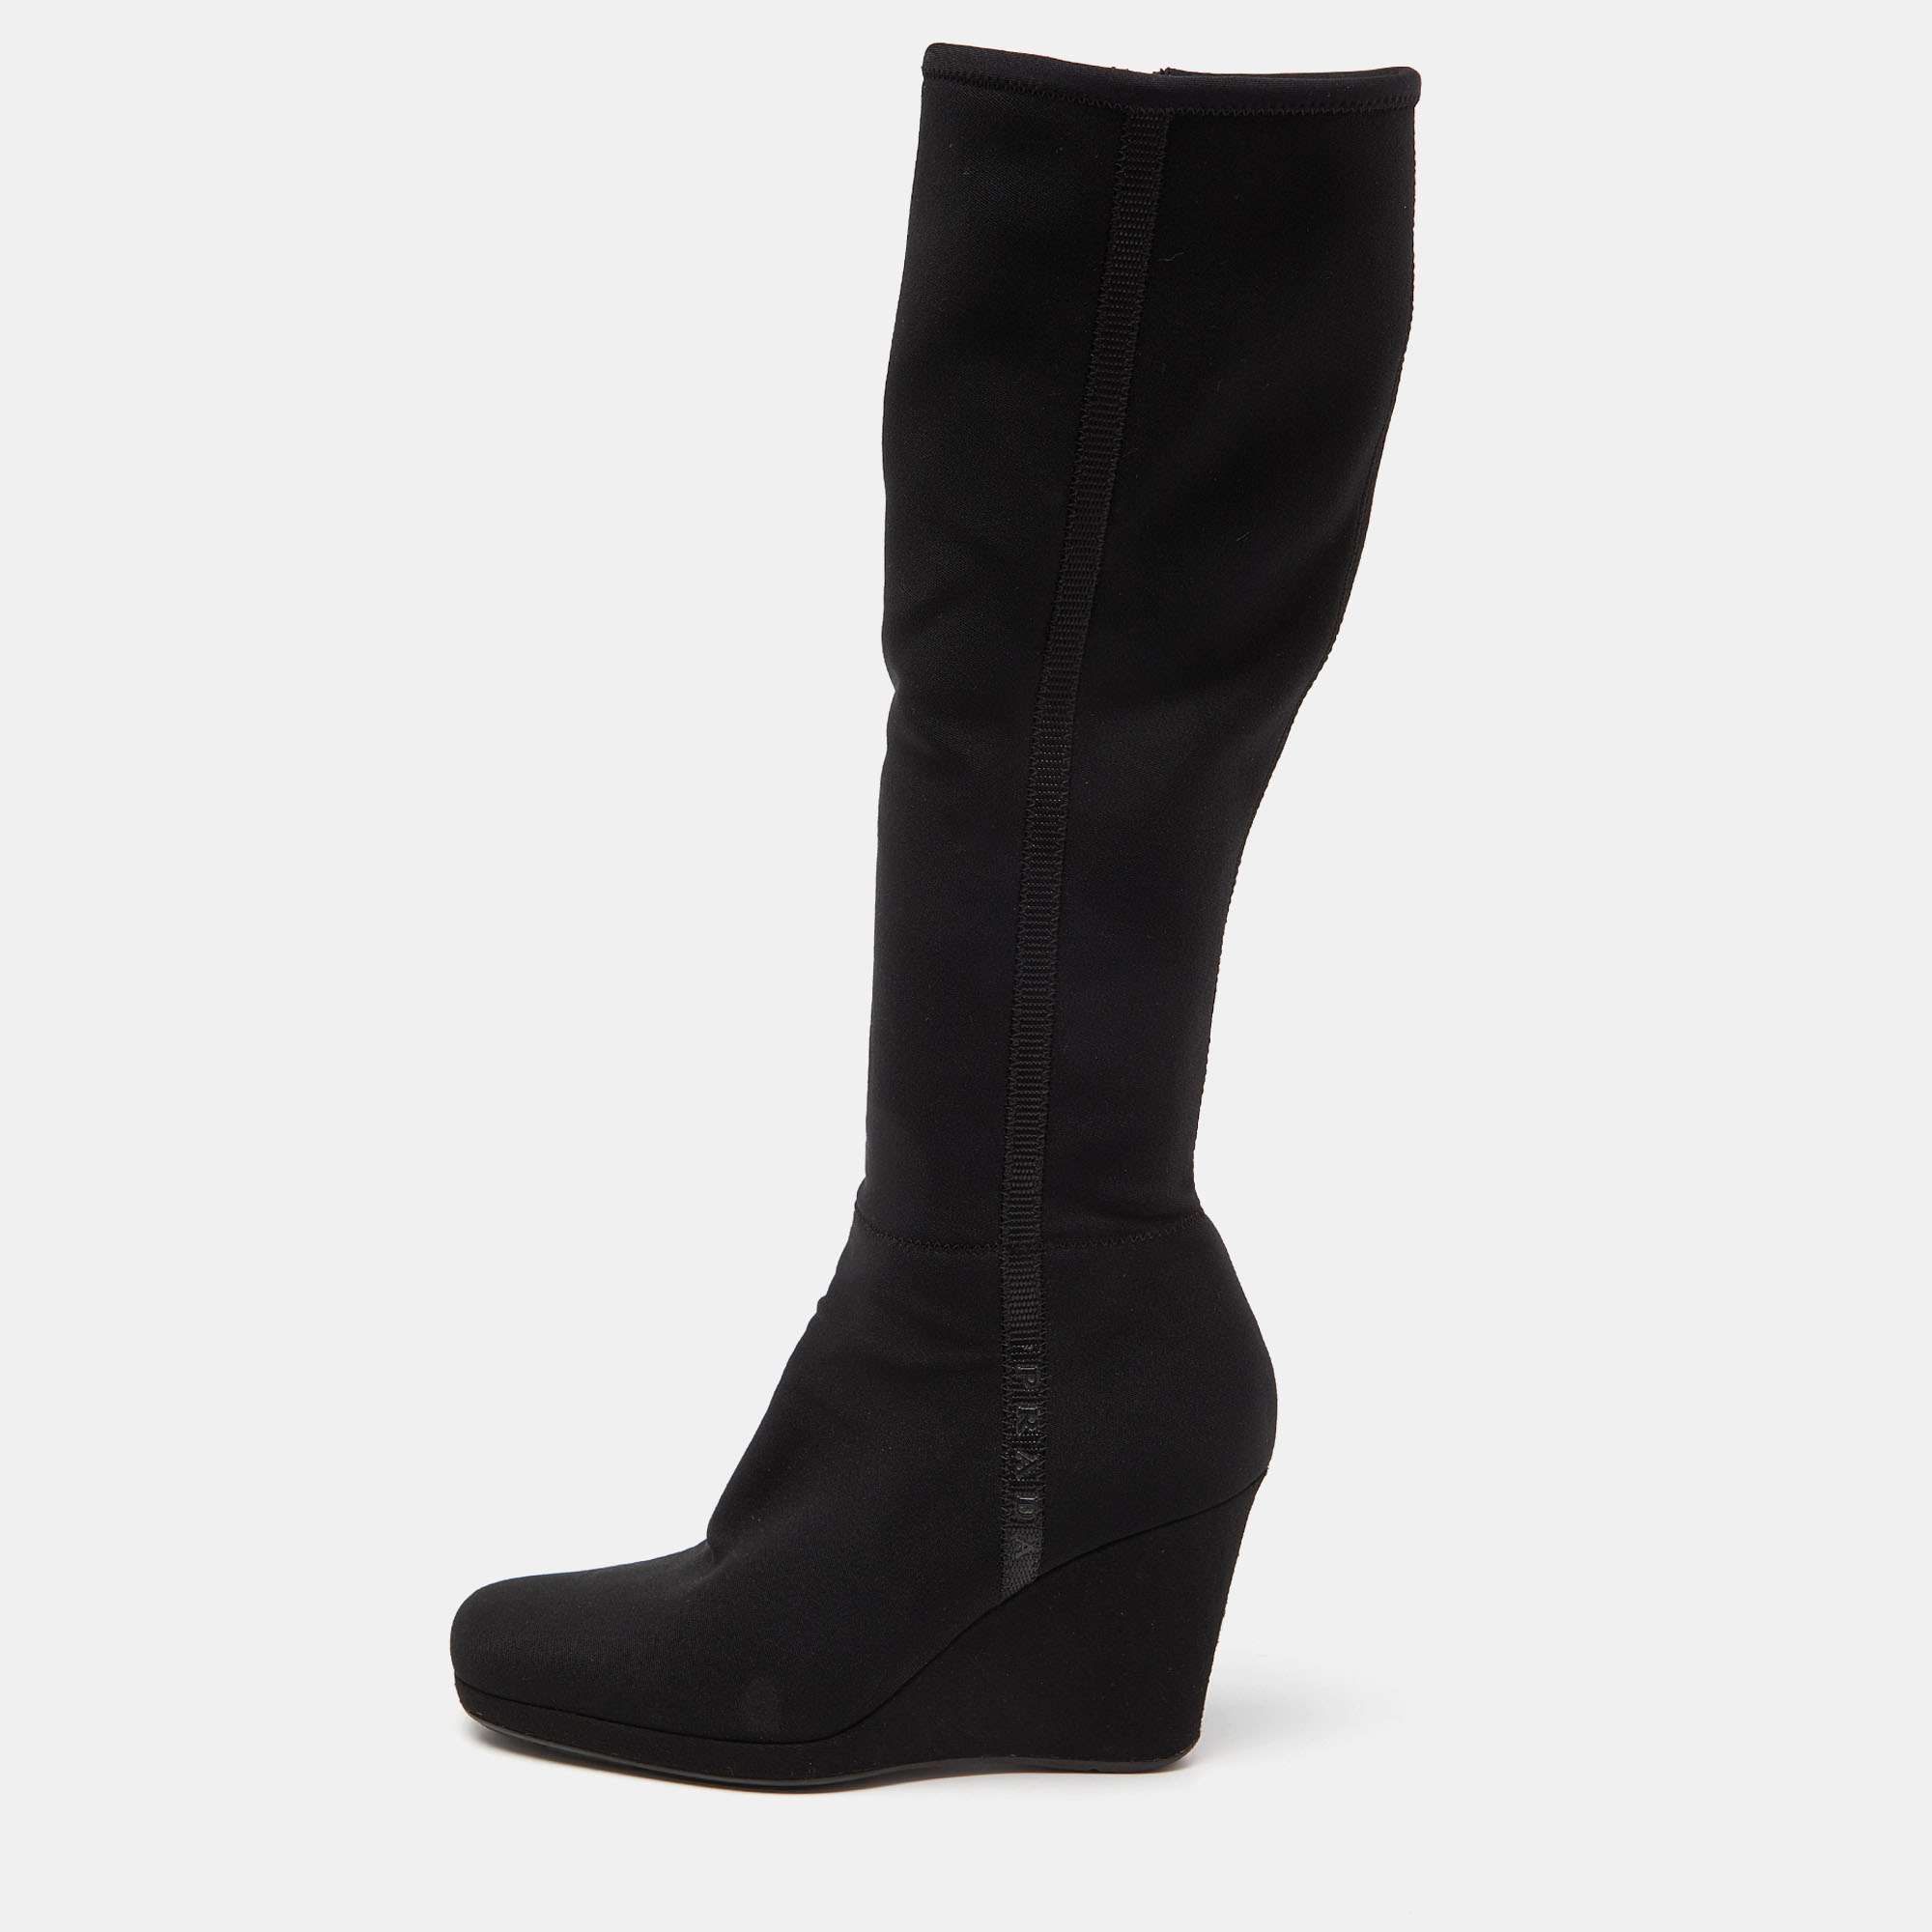 This pair of boots from Prada Sport is high in both fashion and comfort. Crafted from black quality materials they bring round toes side zippers and 9cm wedges. These ankle boots are highly durable and stylish.